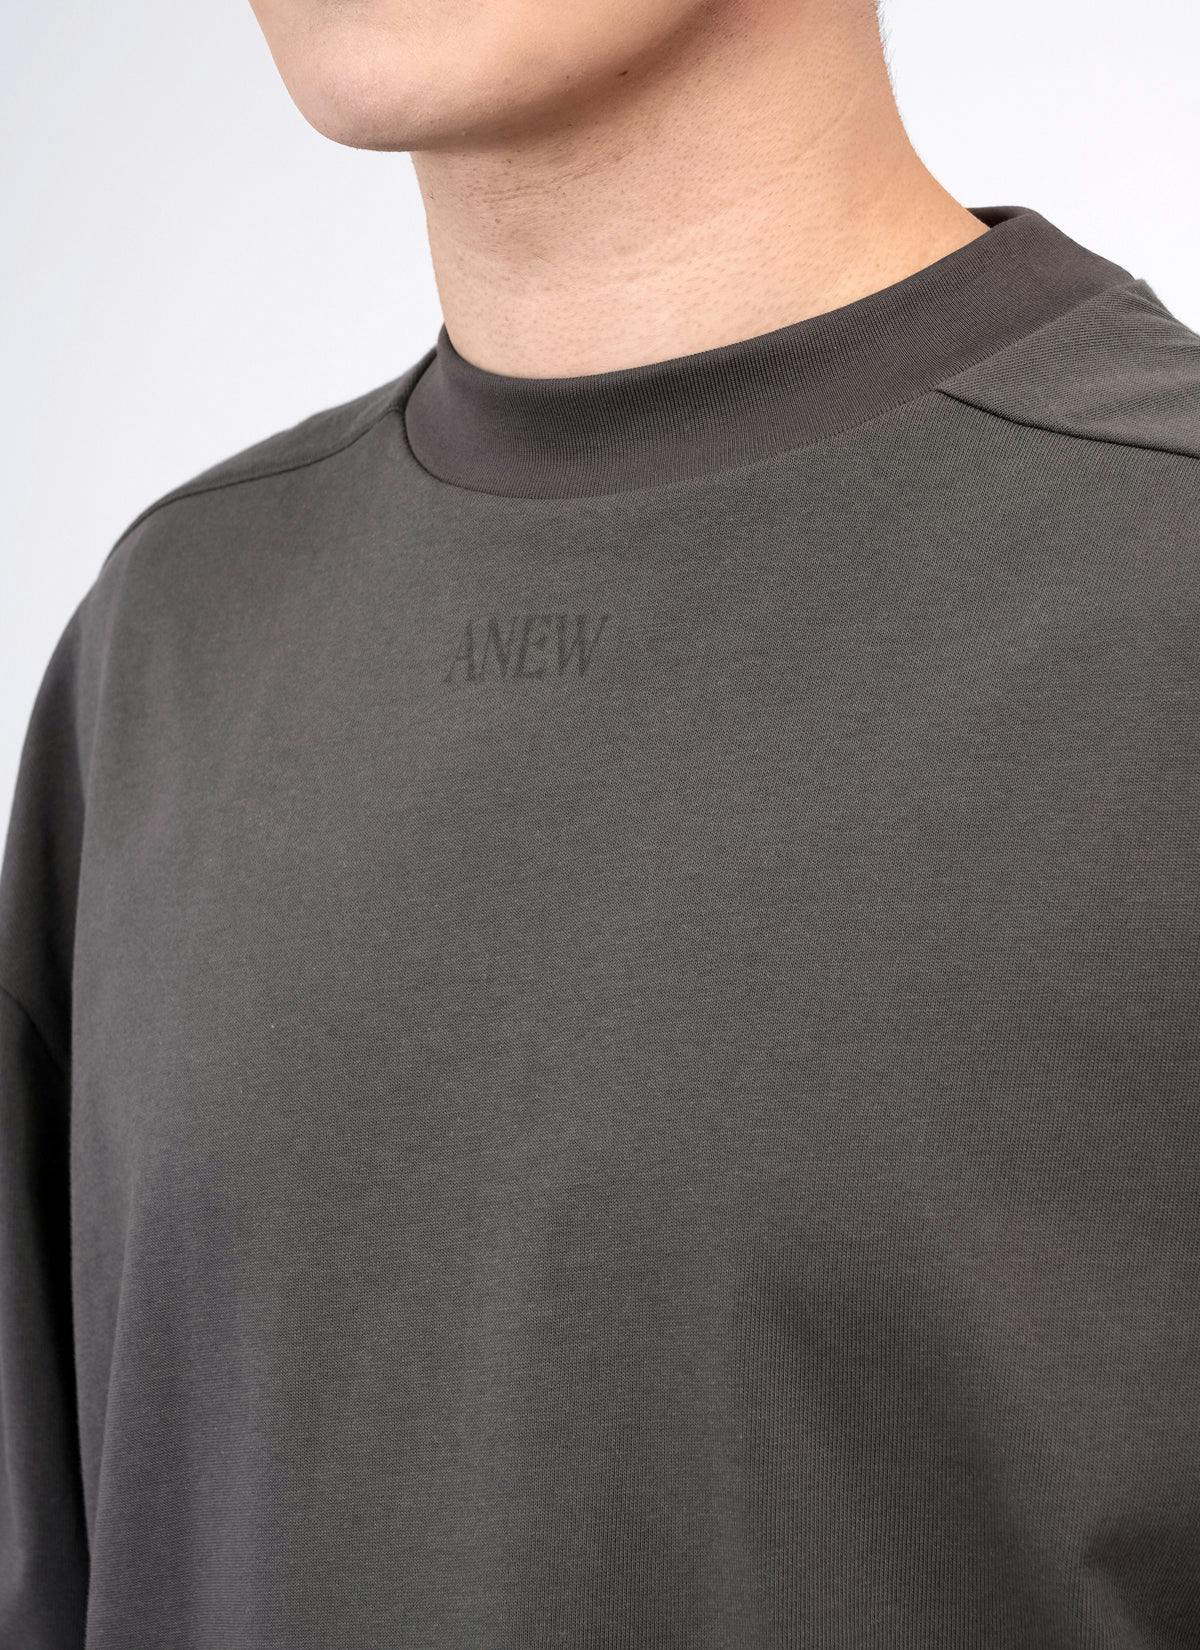 ˝ANEW˝  Relaxed T-Shirt Charcoal/ Charcoal